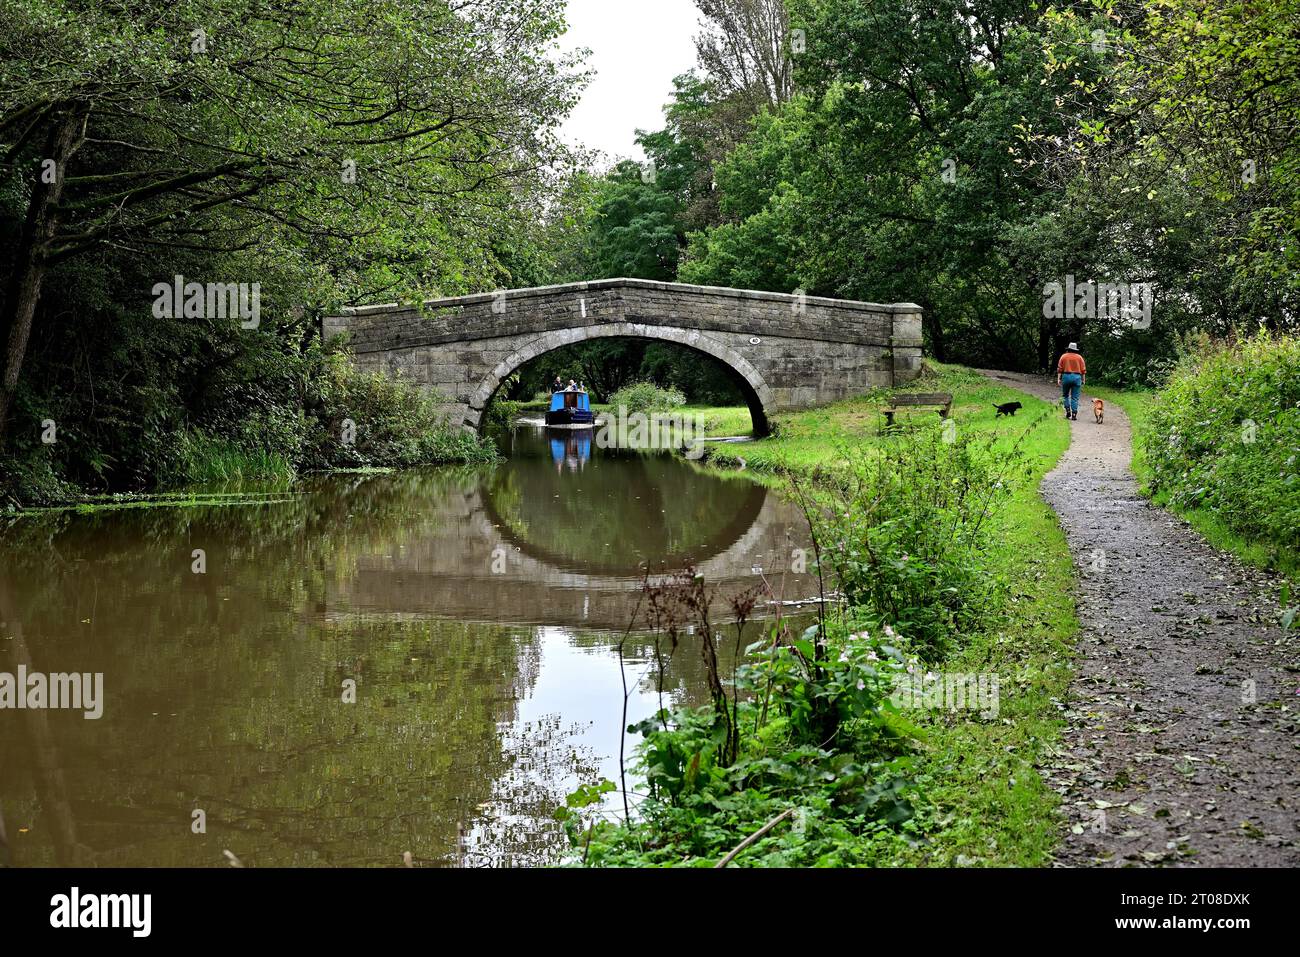 Around the UK - View of the Leeds to Liverpool canal at Parbold, West Lancashire, UK Stock Photo